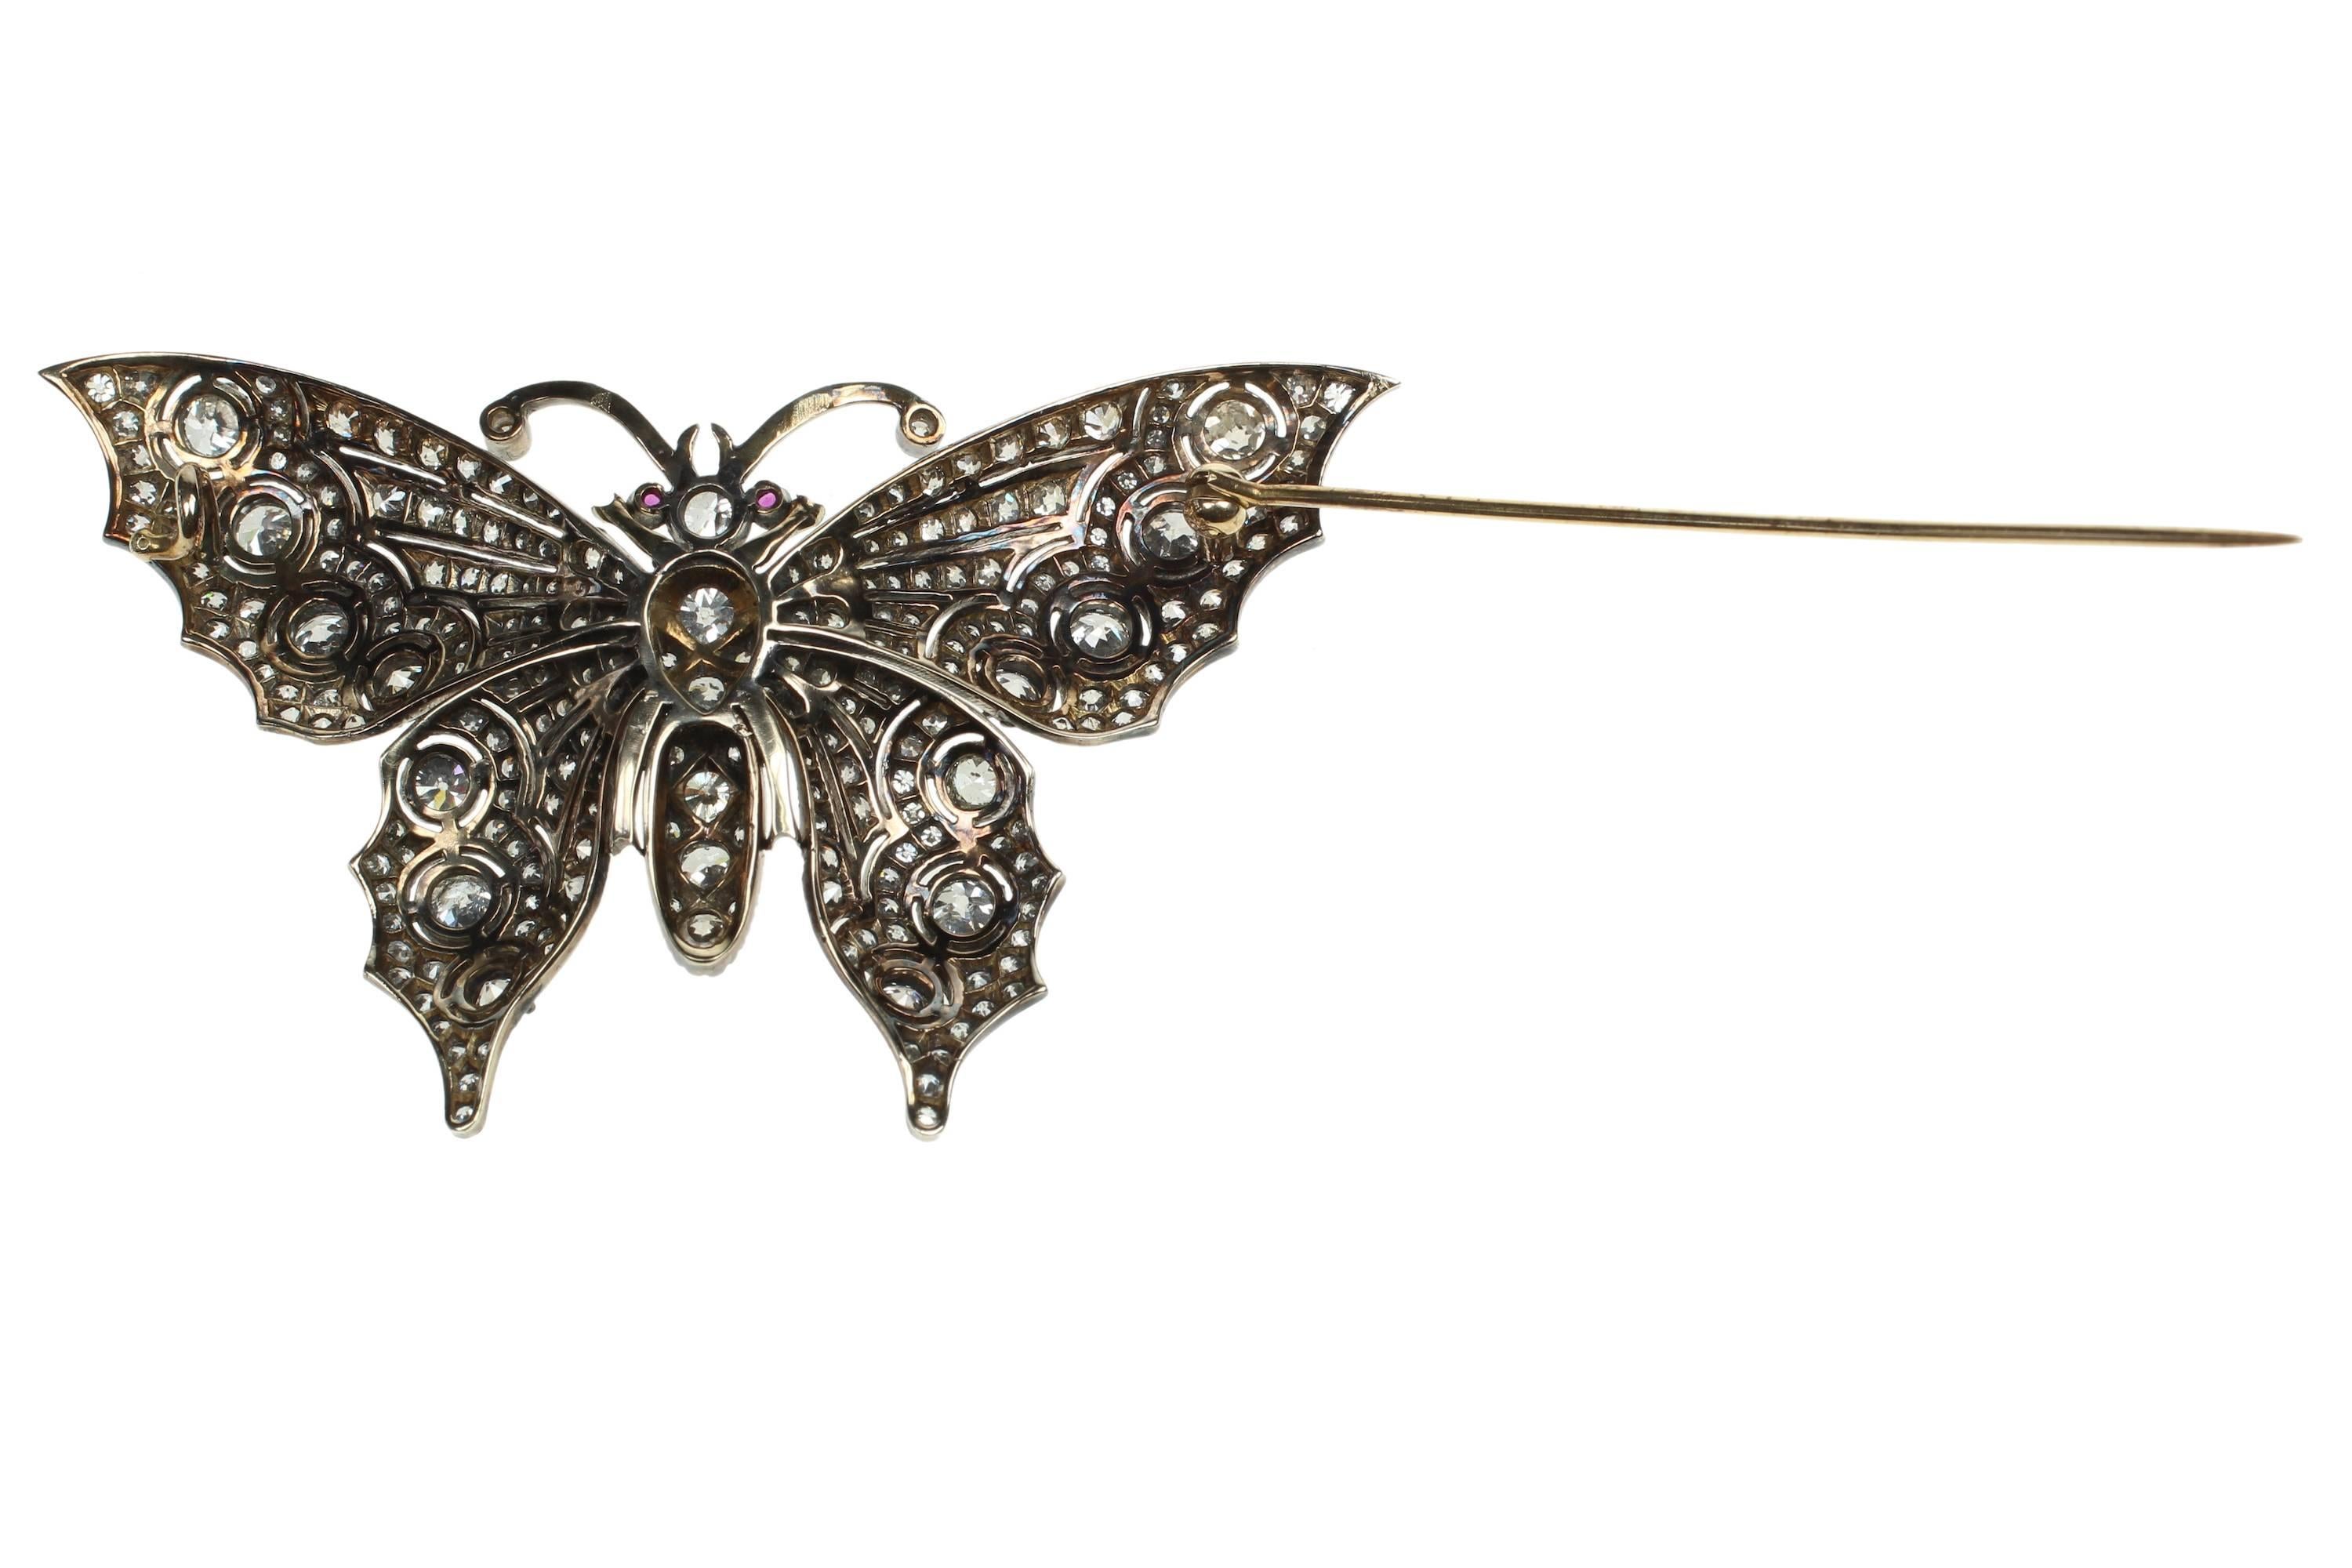 Silver and gold diamond butterfly brooch. Excellent Condition. Origin unknown. 
2.75 inches at longest wingspan and 2 inches from bottom to top.
Total diamond content approx 4 cts  c. 1900